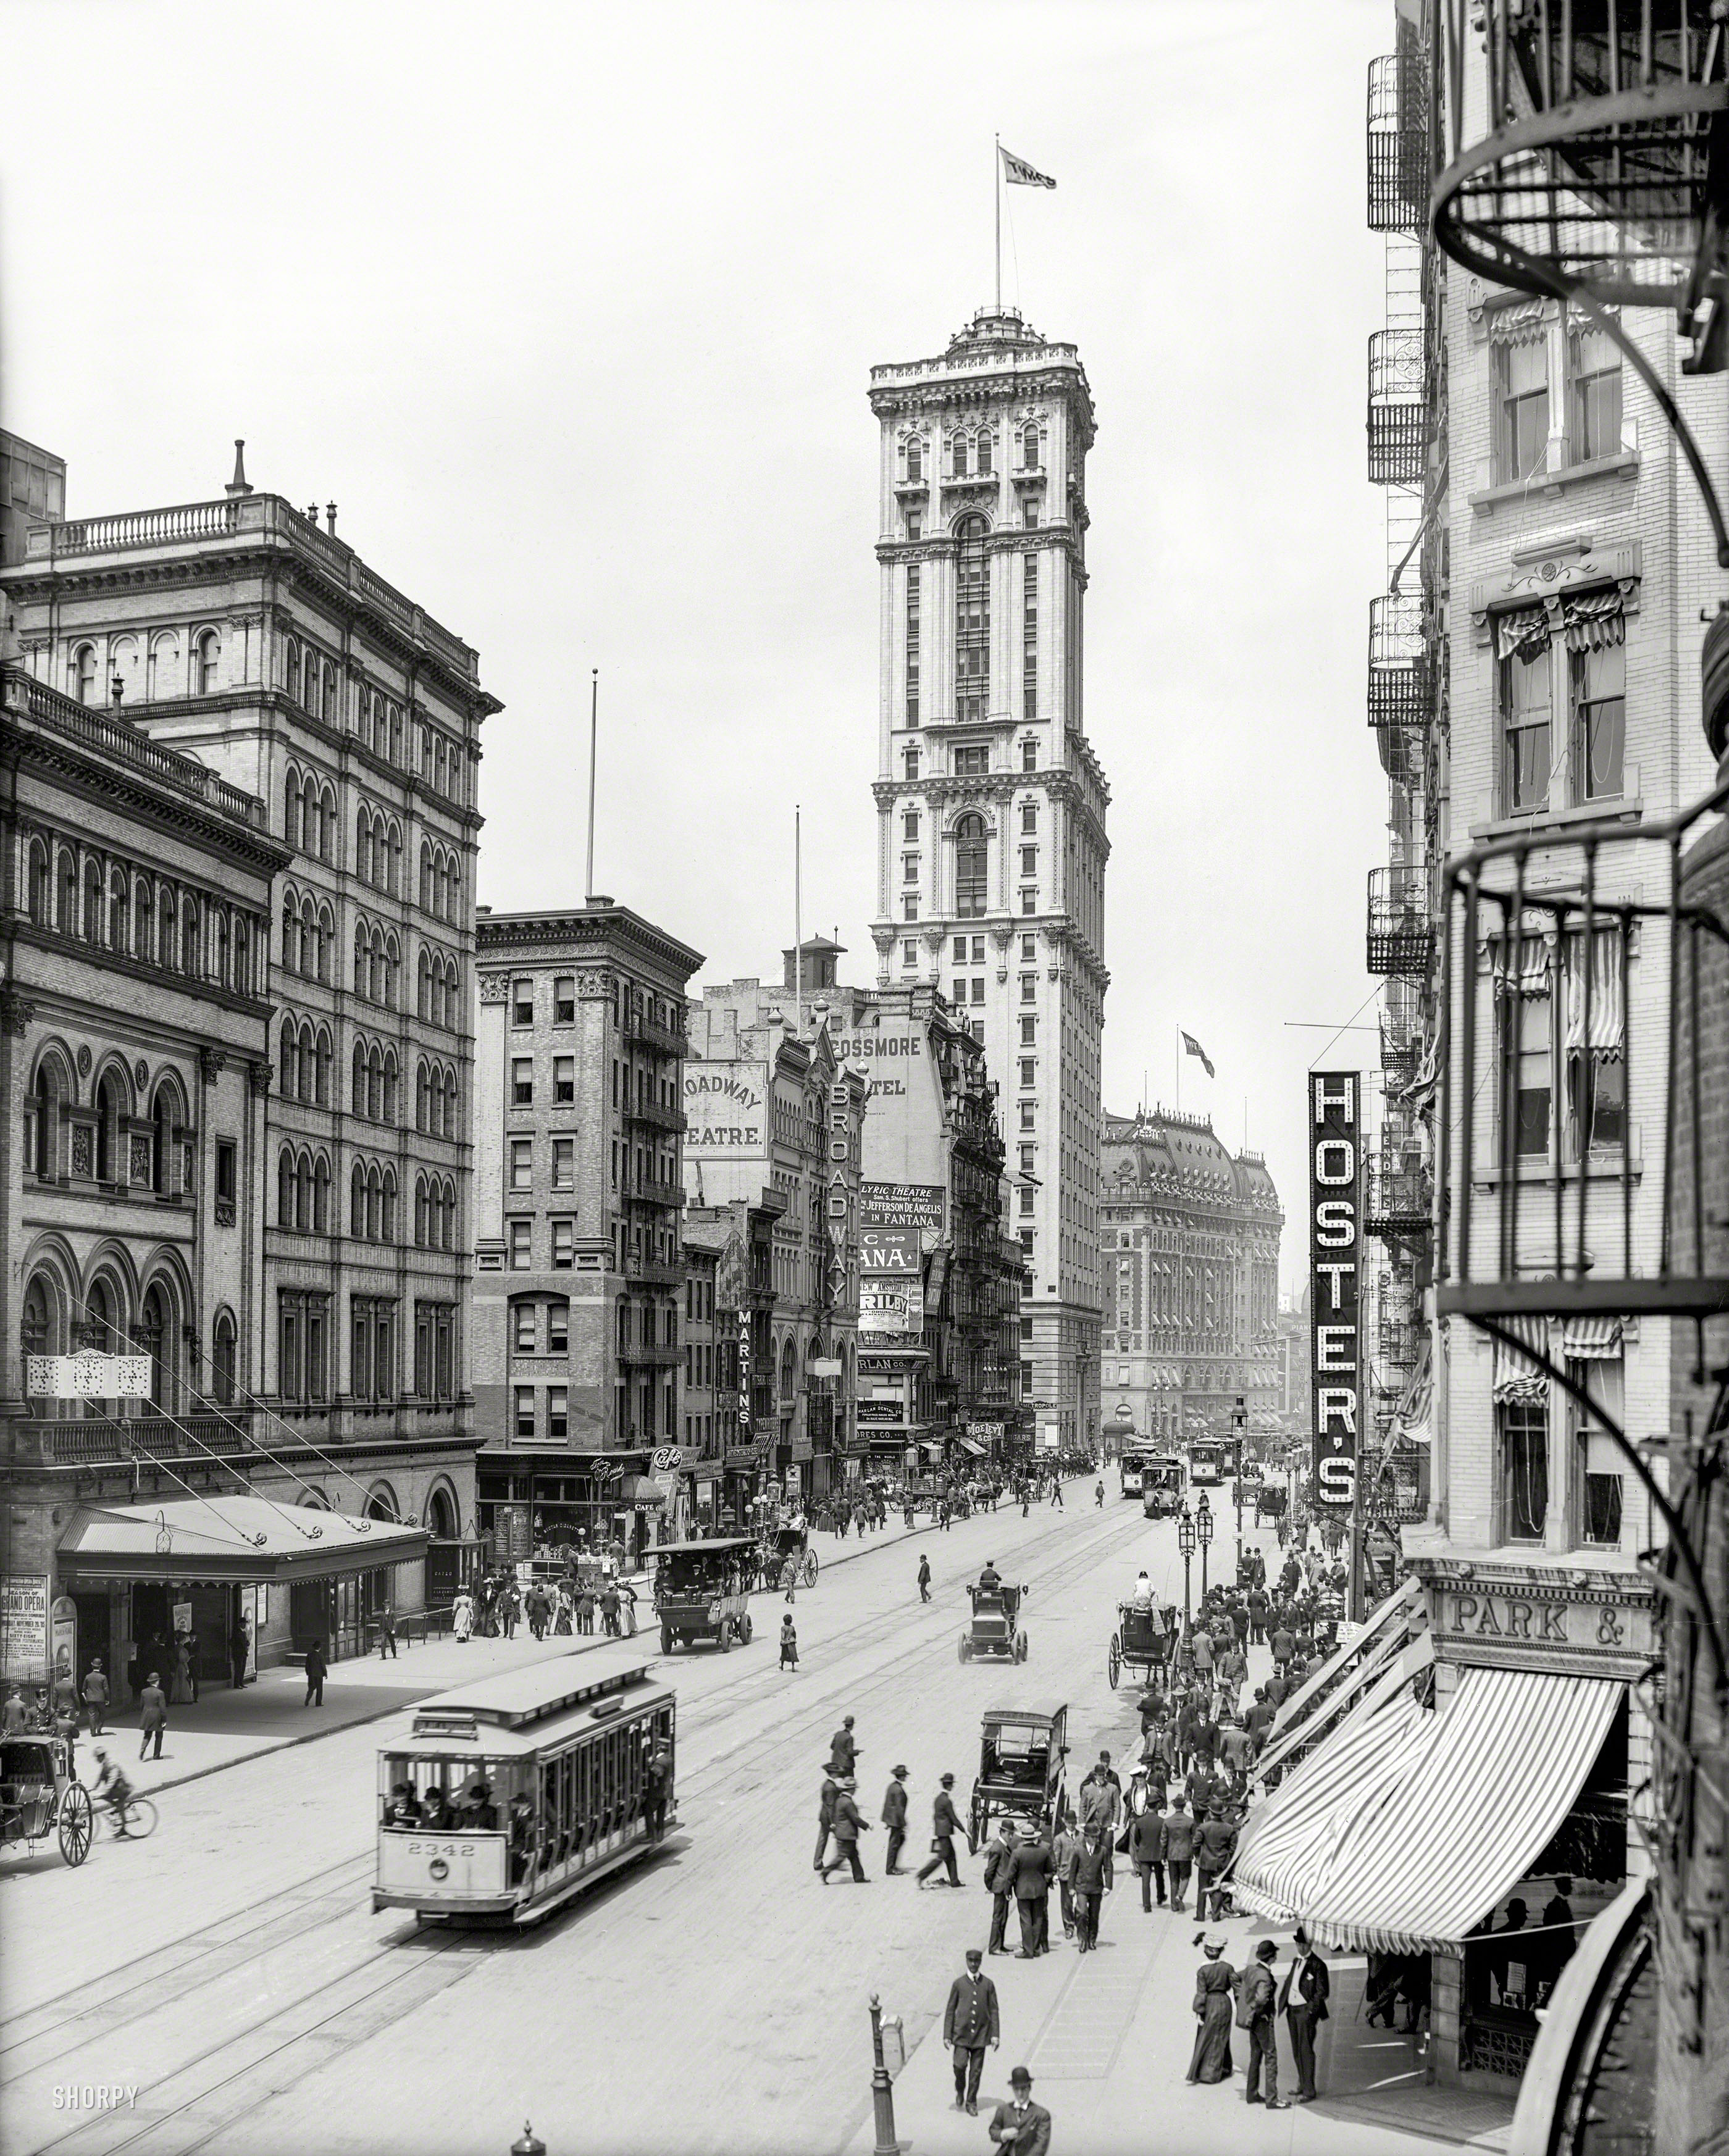 New York circa 1905. "Broadway and Times Building (1 Times Square)." 8x10 inch dry plate glass negative, Detroit Publishing Company. View full size.